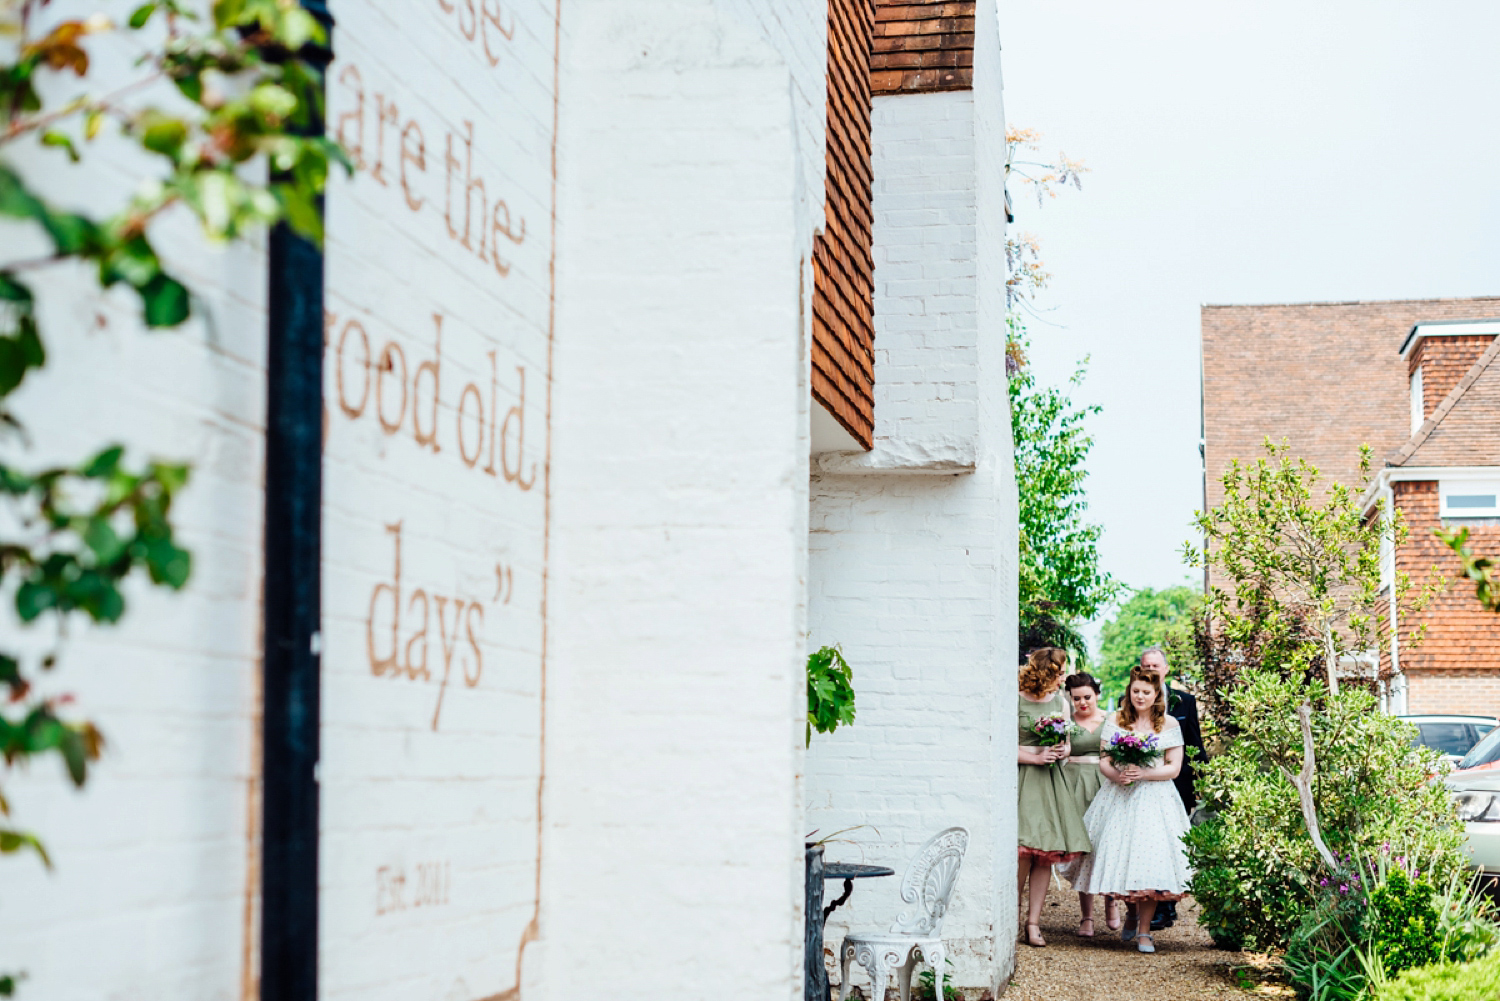 Bride Frankie wore a 1950's inspired, colourful polka dot dress by 'Oh My Honey' for her geek-chic and reto inspired wedding. Photography by Anna Pumer.